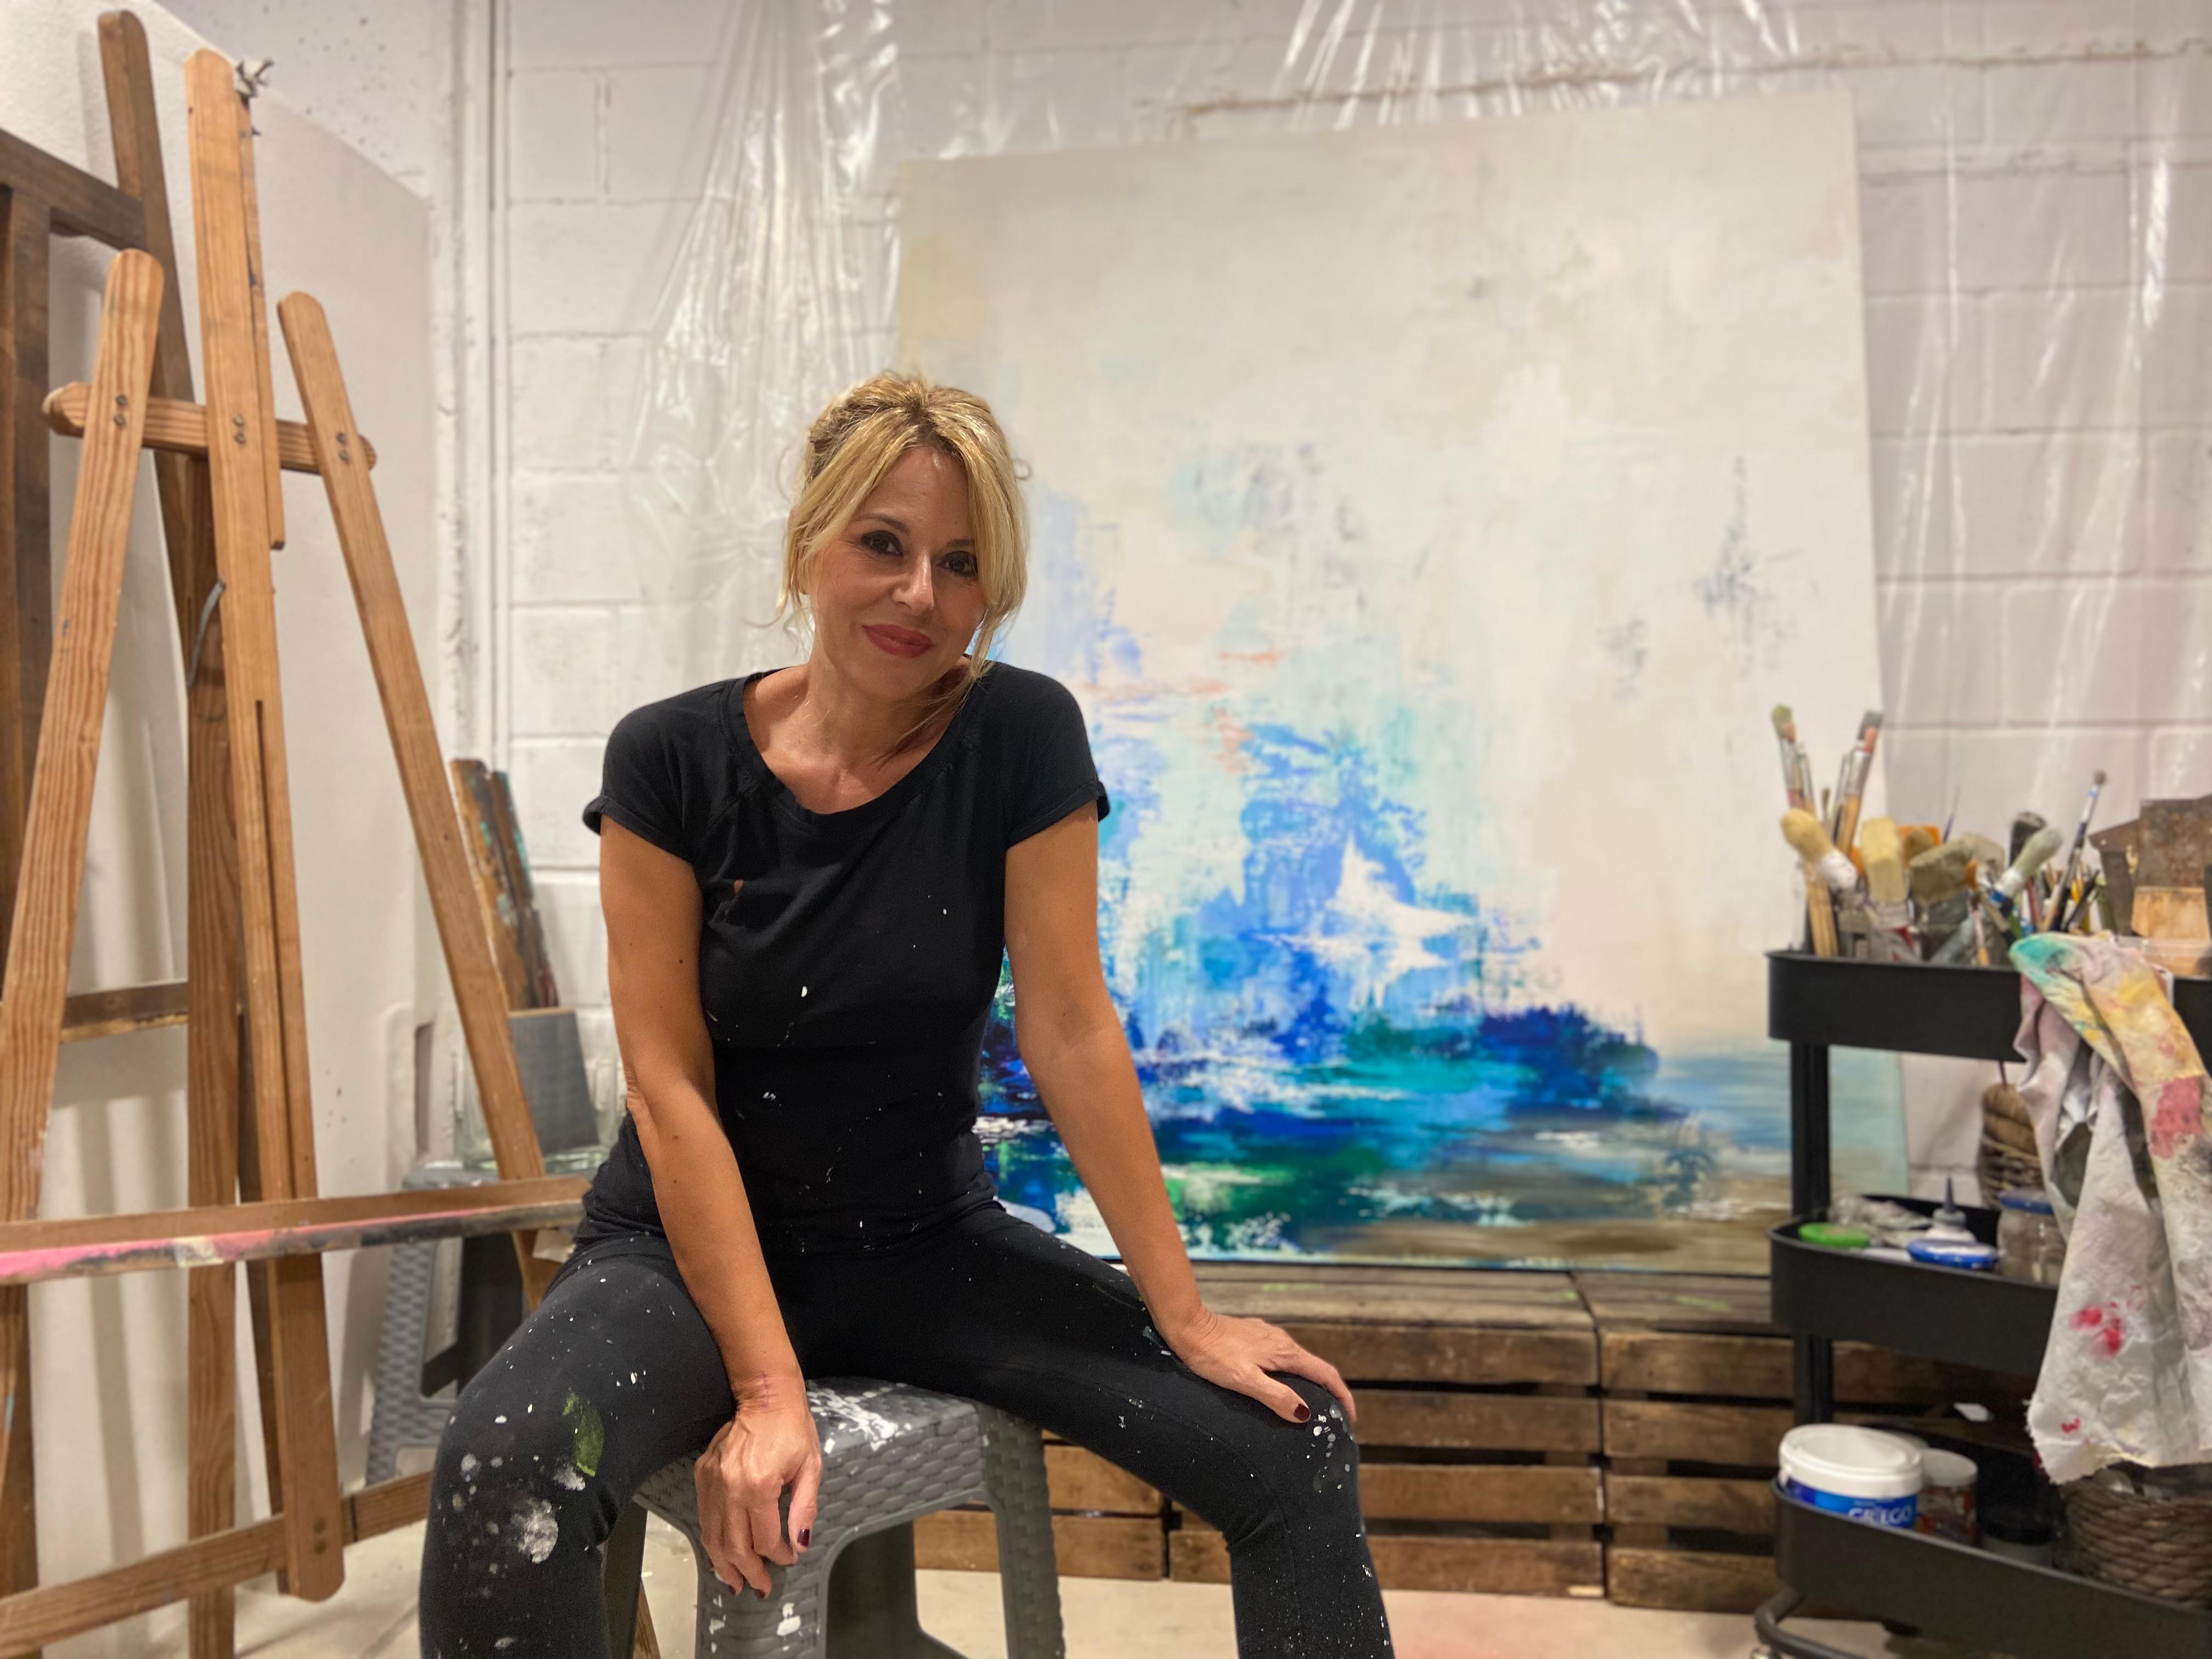 
About the Artist

After living several years outside Spain, in cities like Bangkok (Thailand), or Dusseldorf (Germany), currently Cristina Estañ, lives and works in Alicante (Spain).

Multidisciplinary artist, trained in Art and Fashion (ESED,